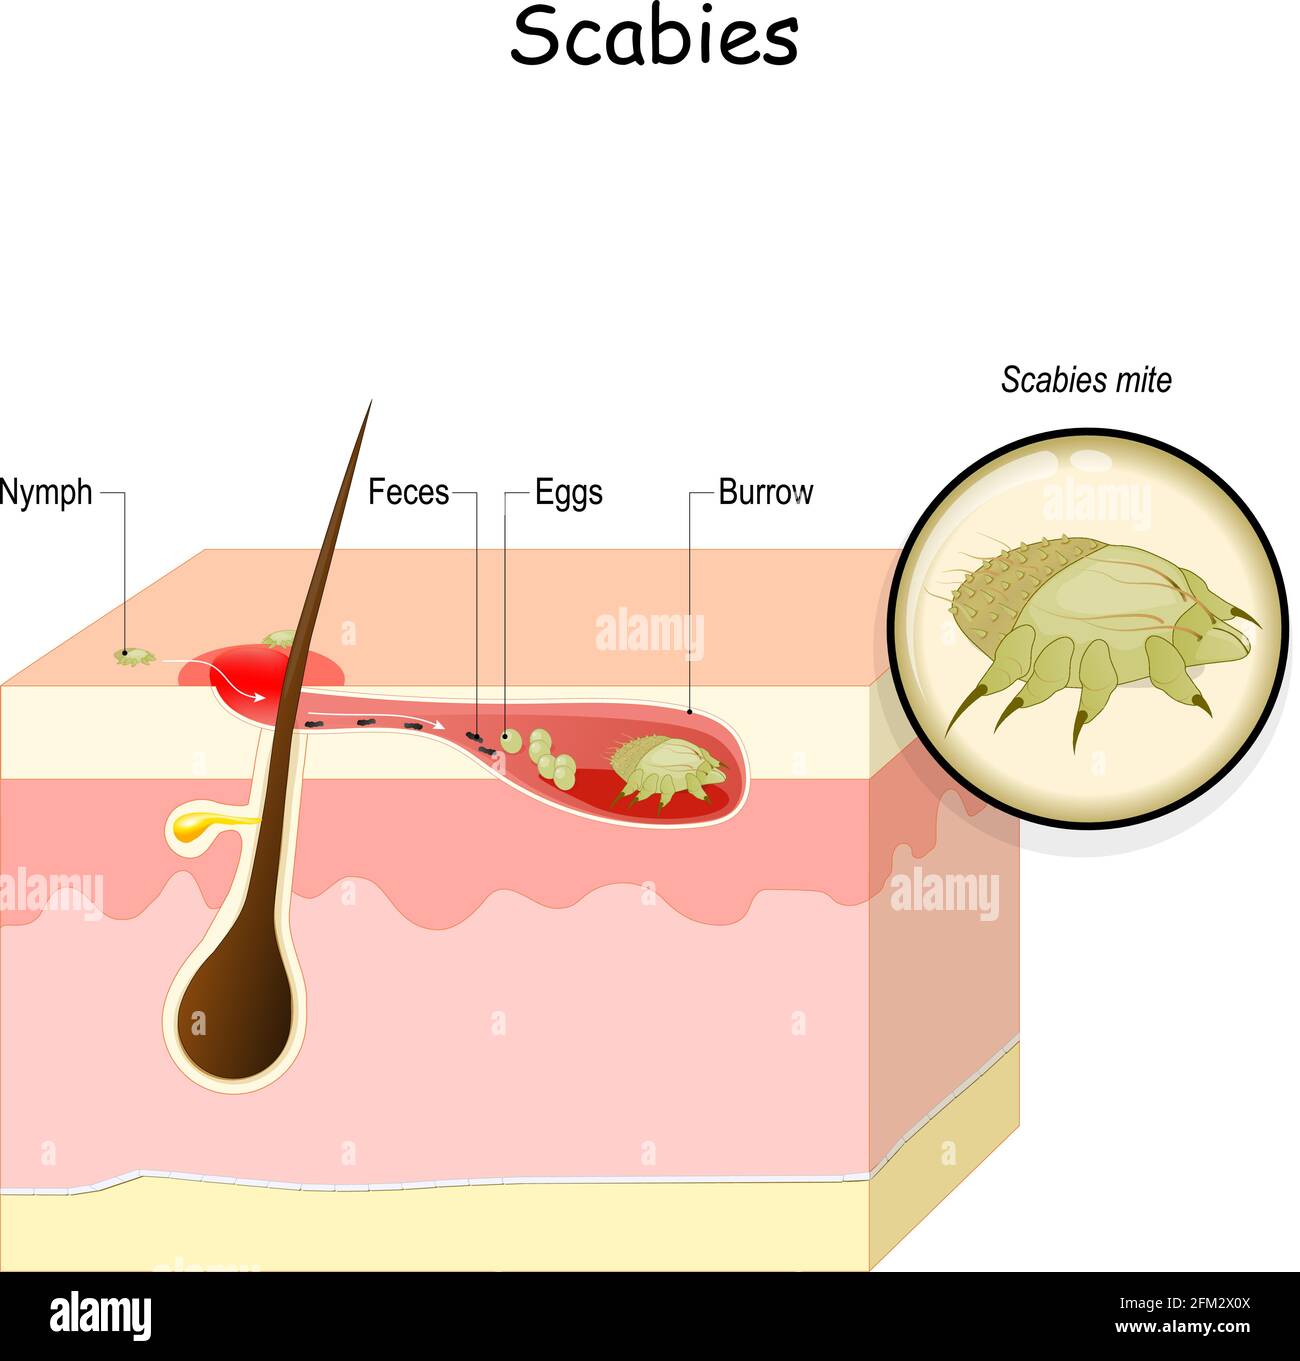 Scabies. seven-year itch is a contagious skin infestation by the mite Sarcoptes scabiei. Skin with eggs and mite in a burrow. Close-up of Scabies mite Stock Vector